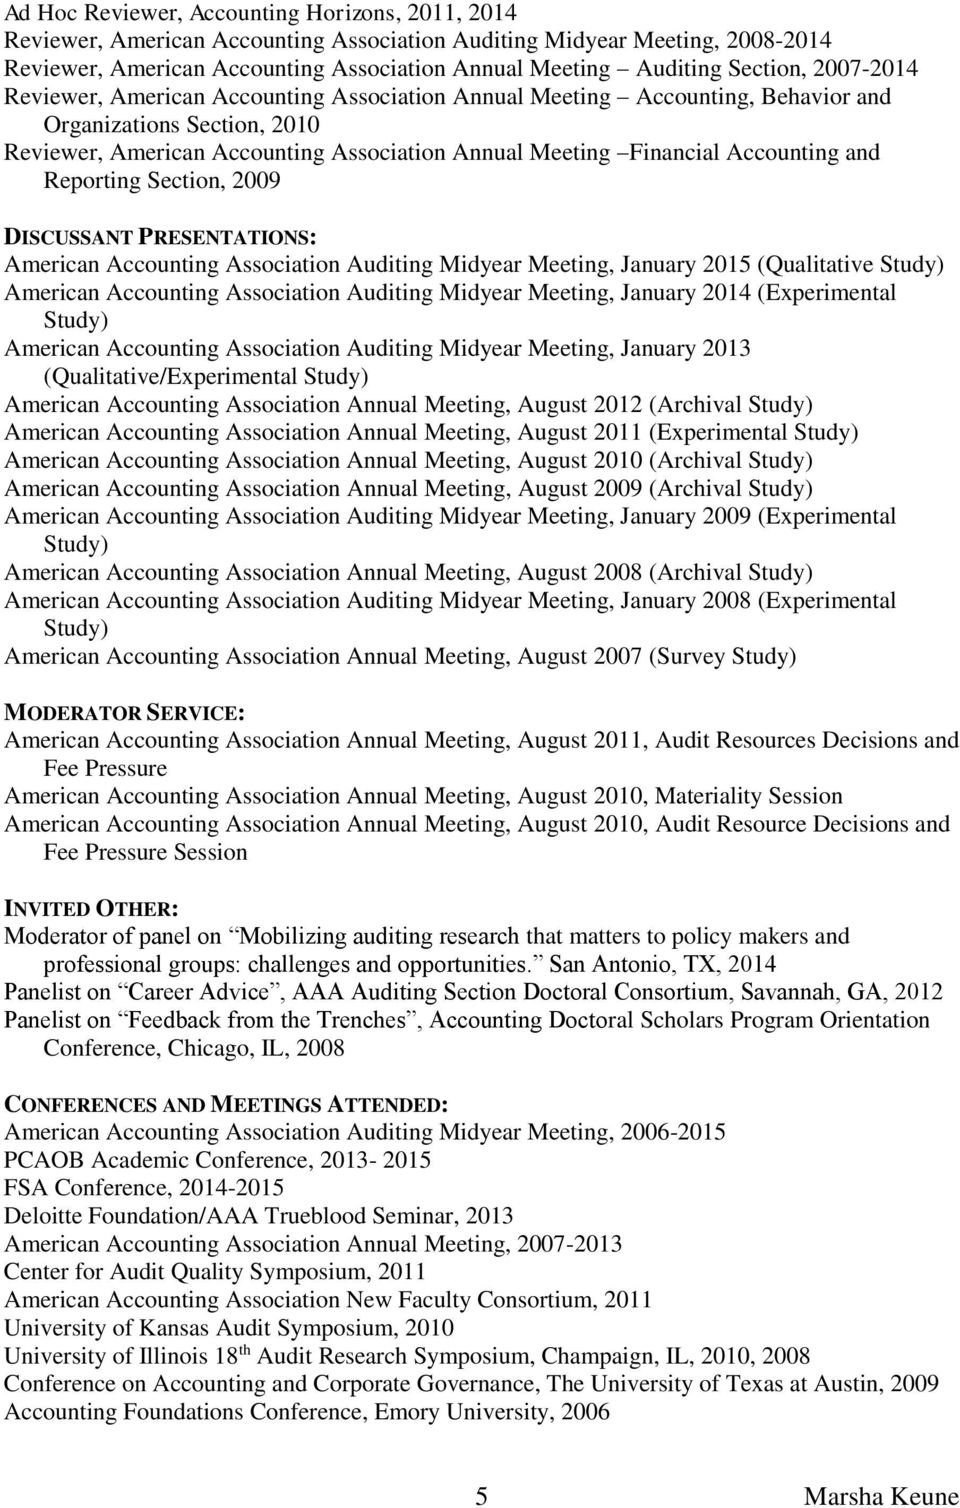 Accounting and Reporting Section, 2009 DISCUSSANT PRESENTATIONS: American Accounting Association Auditing Midyear Meeting, January 2015 (Qualitative Study) American Accounting Association Auditing